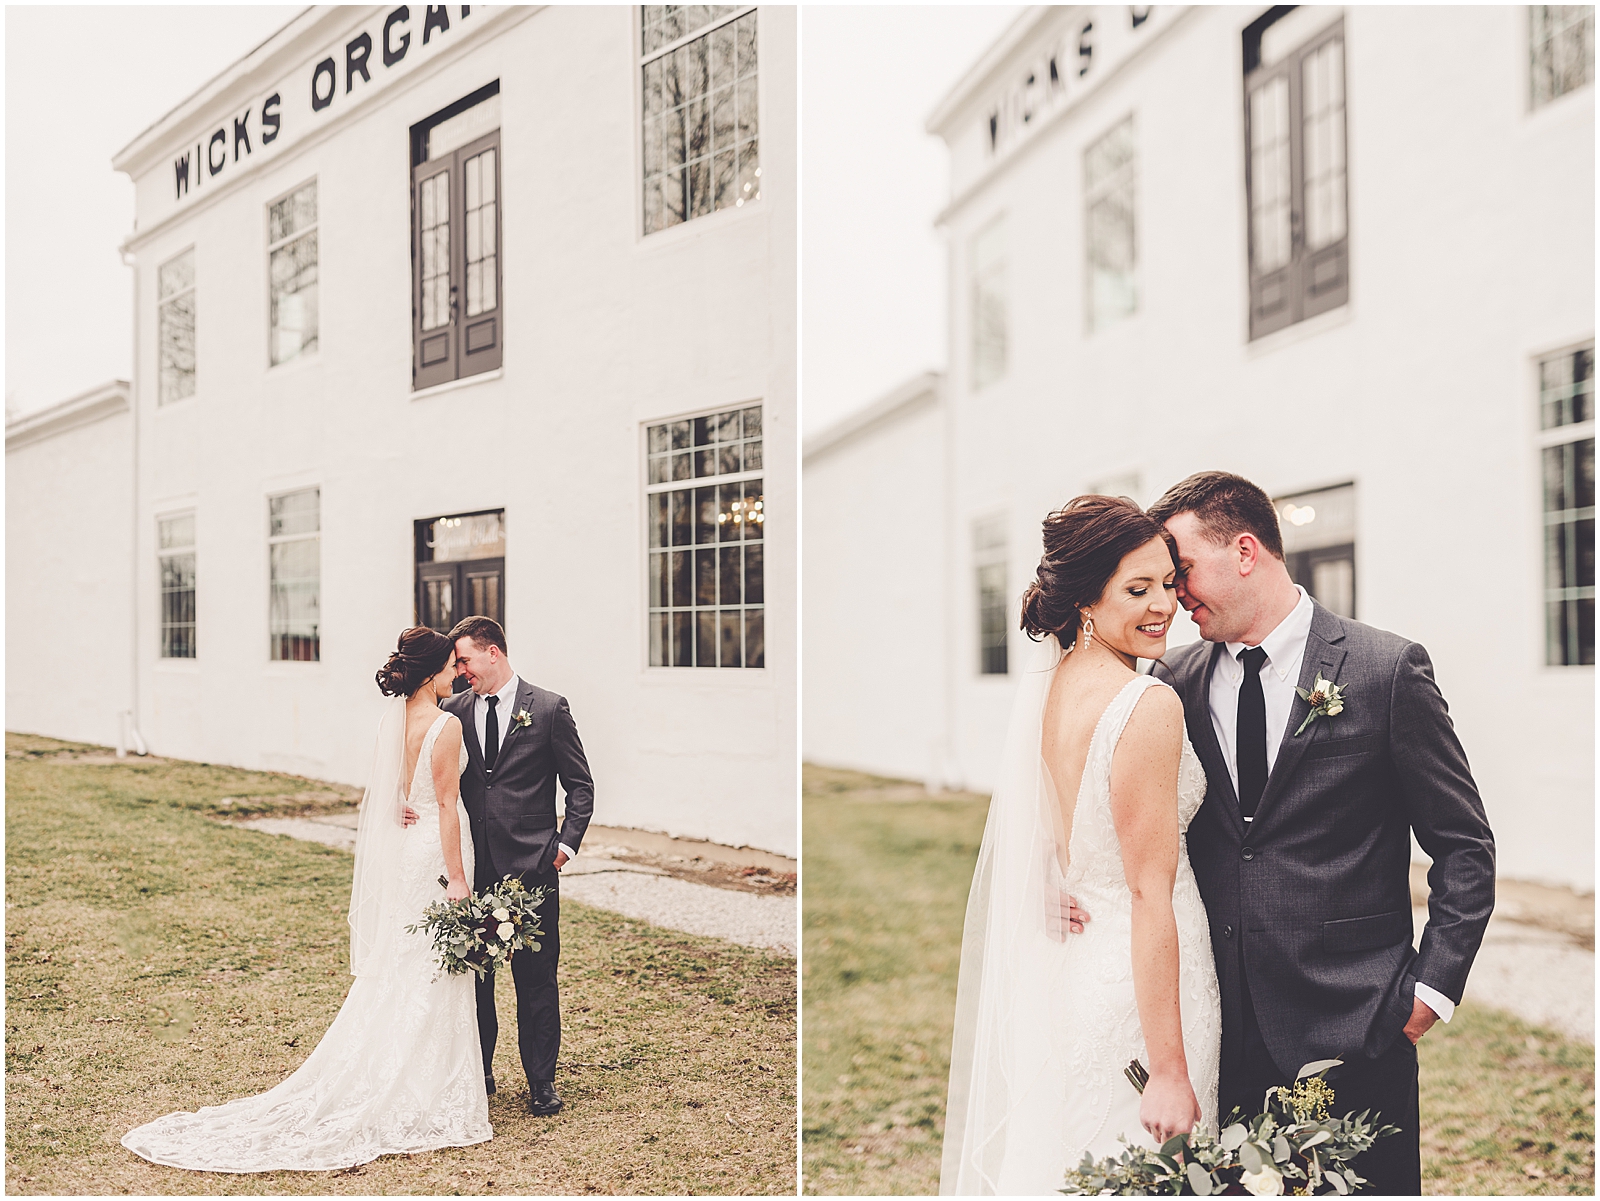 Allye & Grant's winter wedding at the Olde Wicks Factory in Highland, Illinois with Chicagoland wedding photographer Kara Evans Photographer.